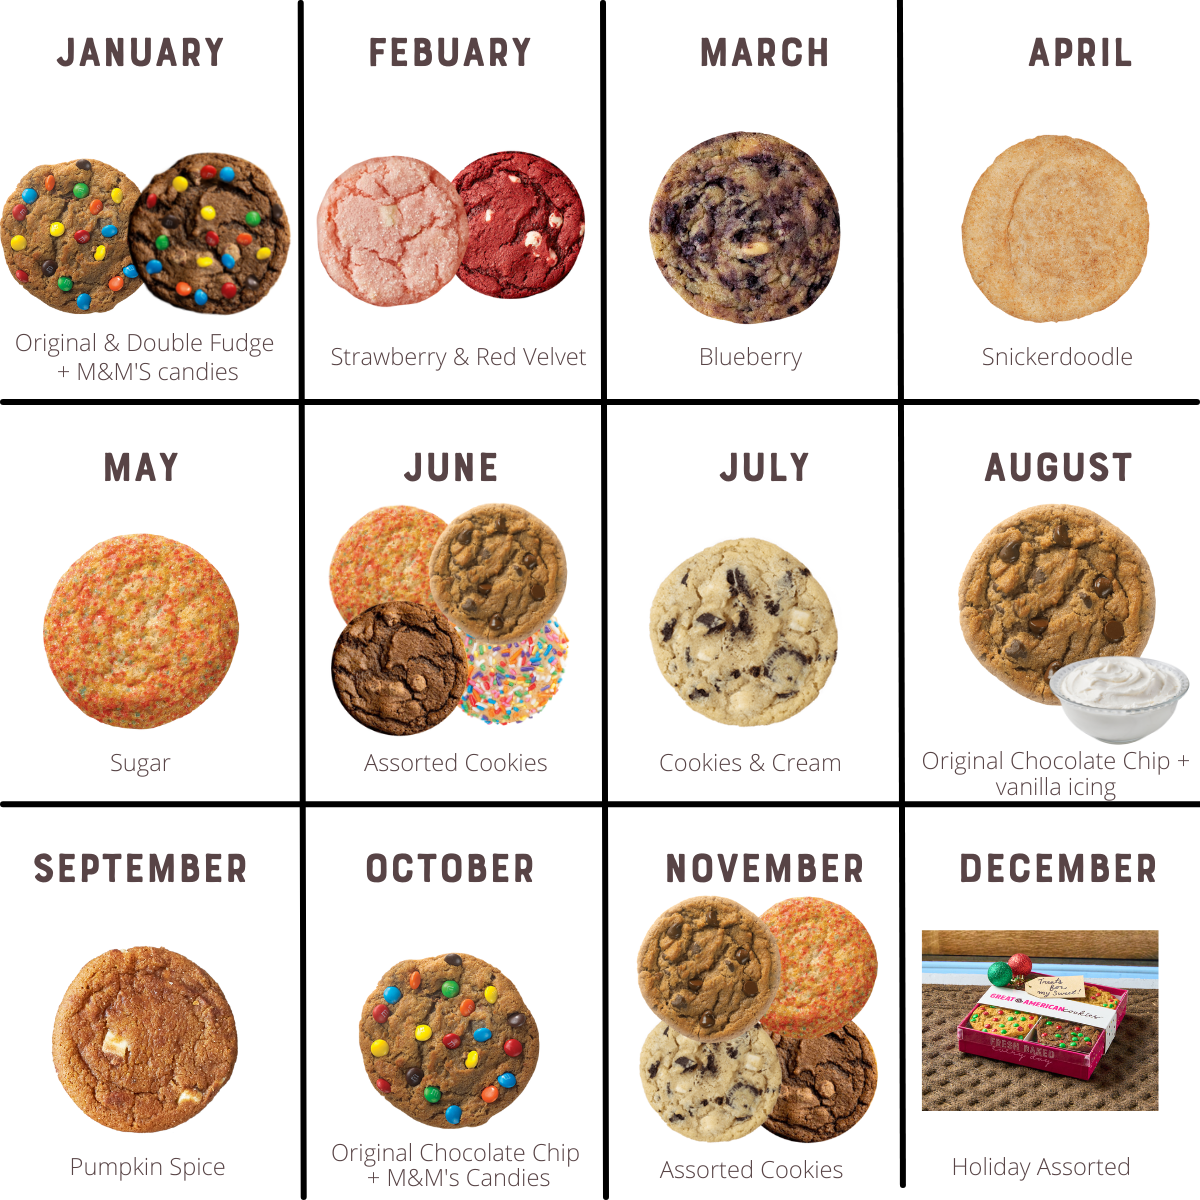 Cookie subscription flavors for each